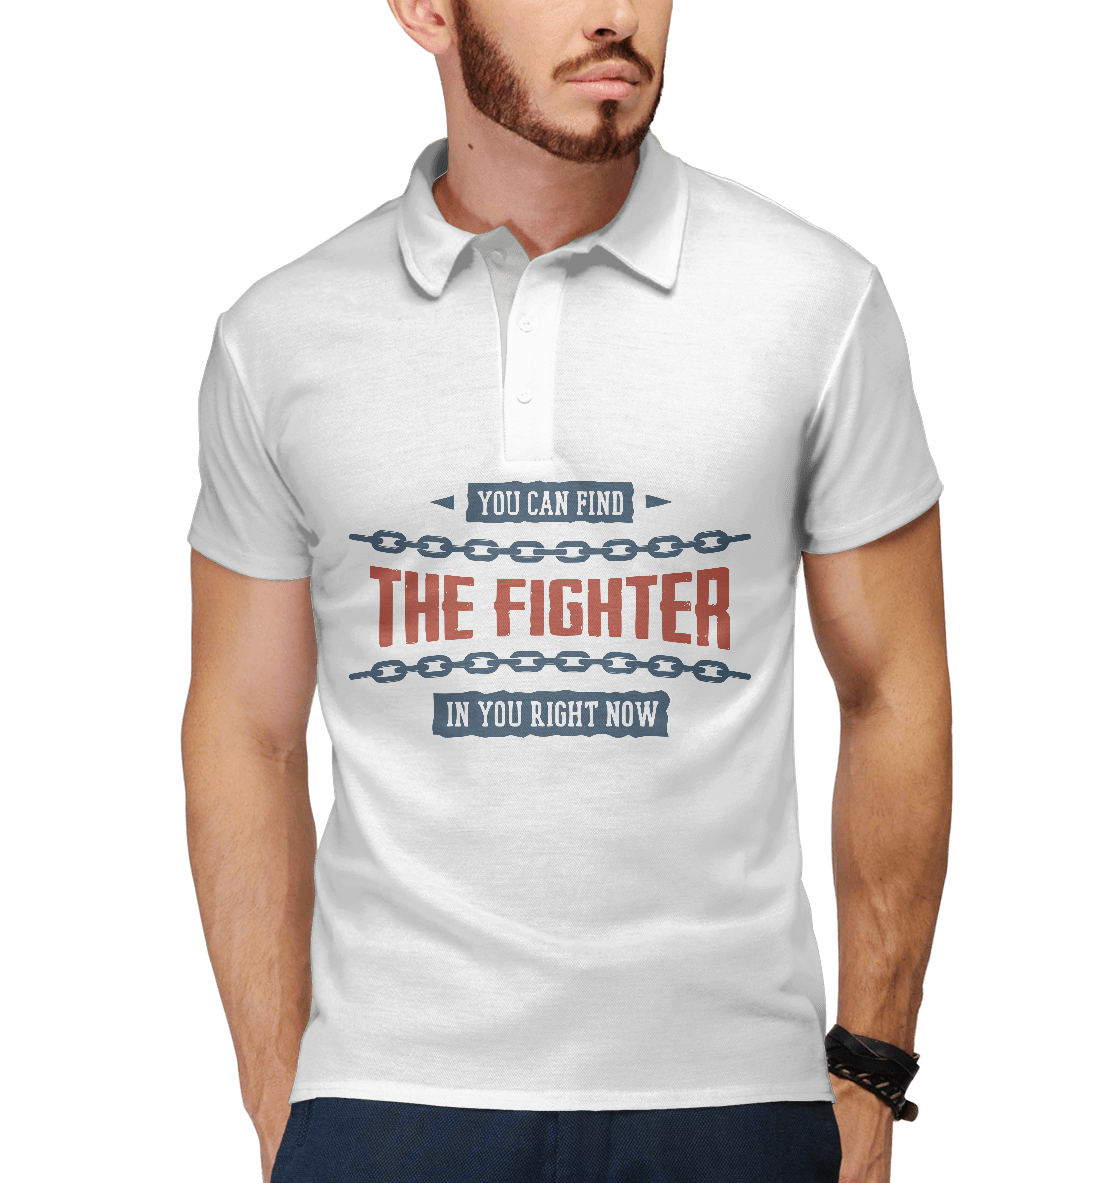 

THE FIGHTER